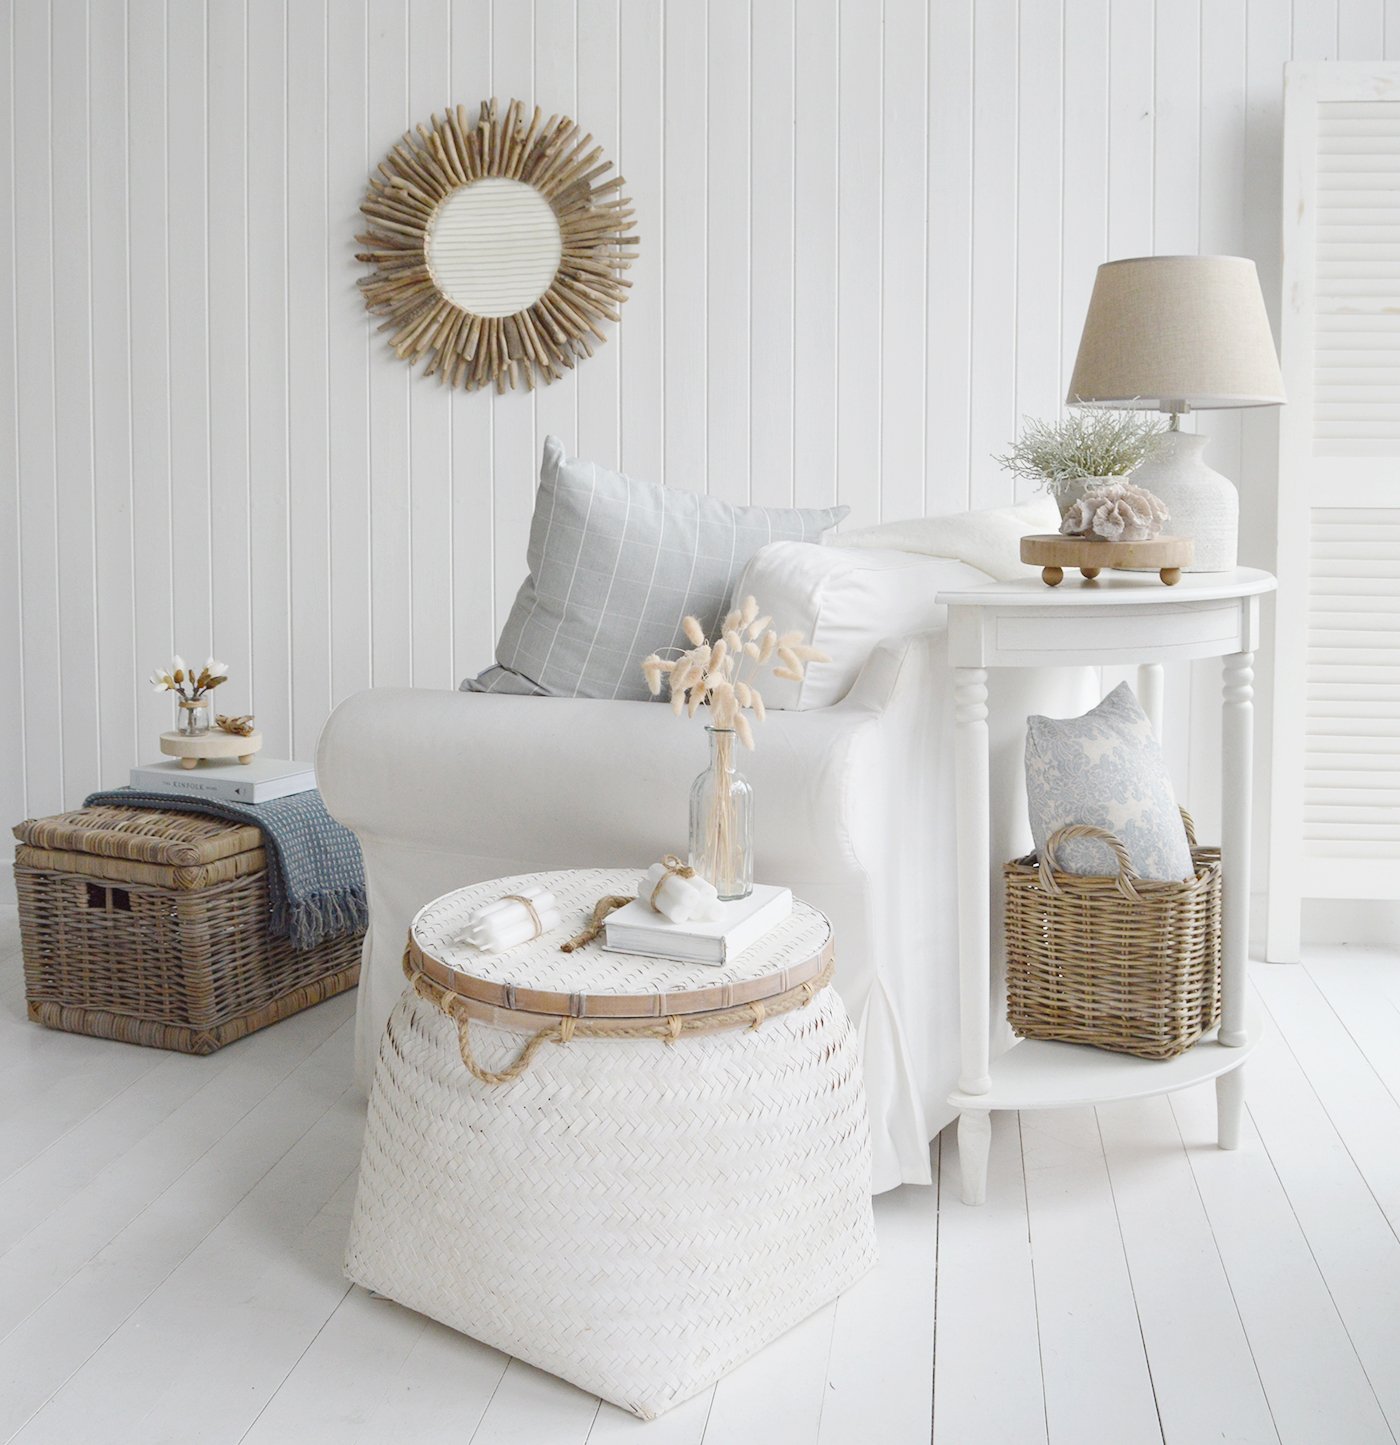 New England white coastal furniture for a beach house Hamptons look with the driftwood mirror, white Cape Ann half moon console table, Nantucket basket table, Seaside coffee table and coastal home accessories